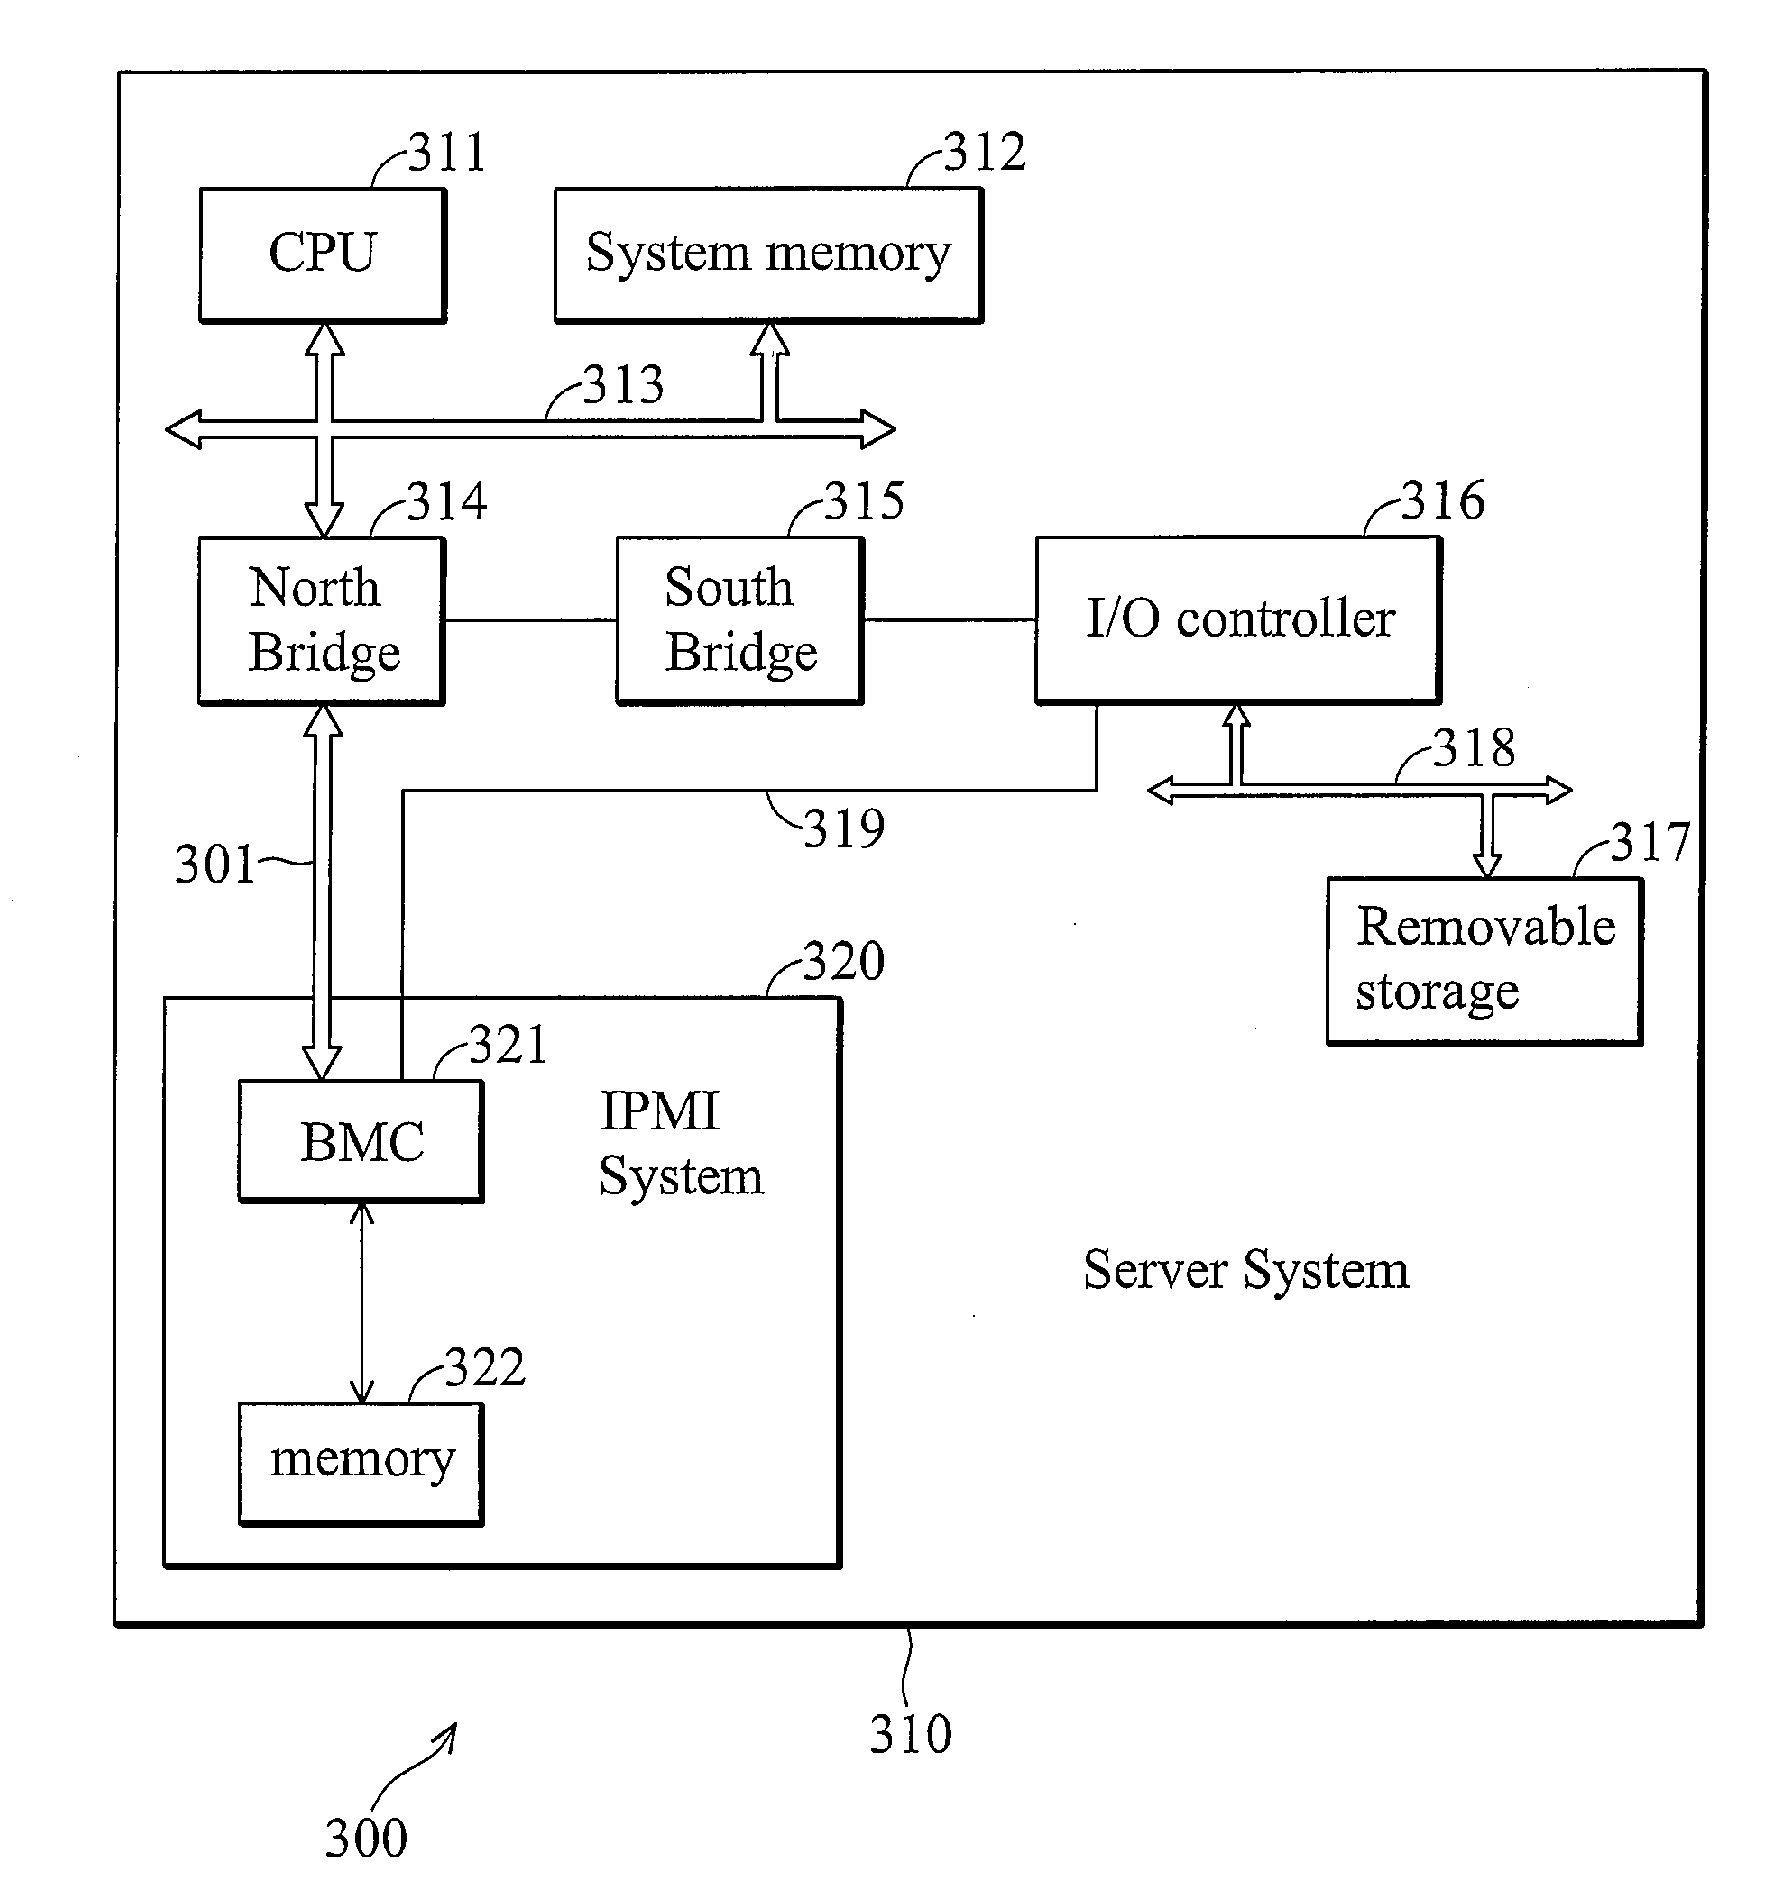 Ipmi systems and electronic apparatus using the same